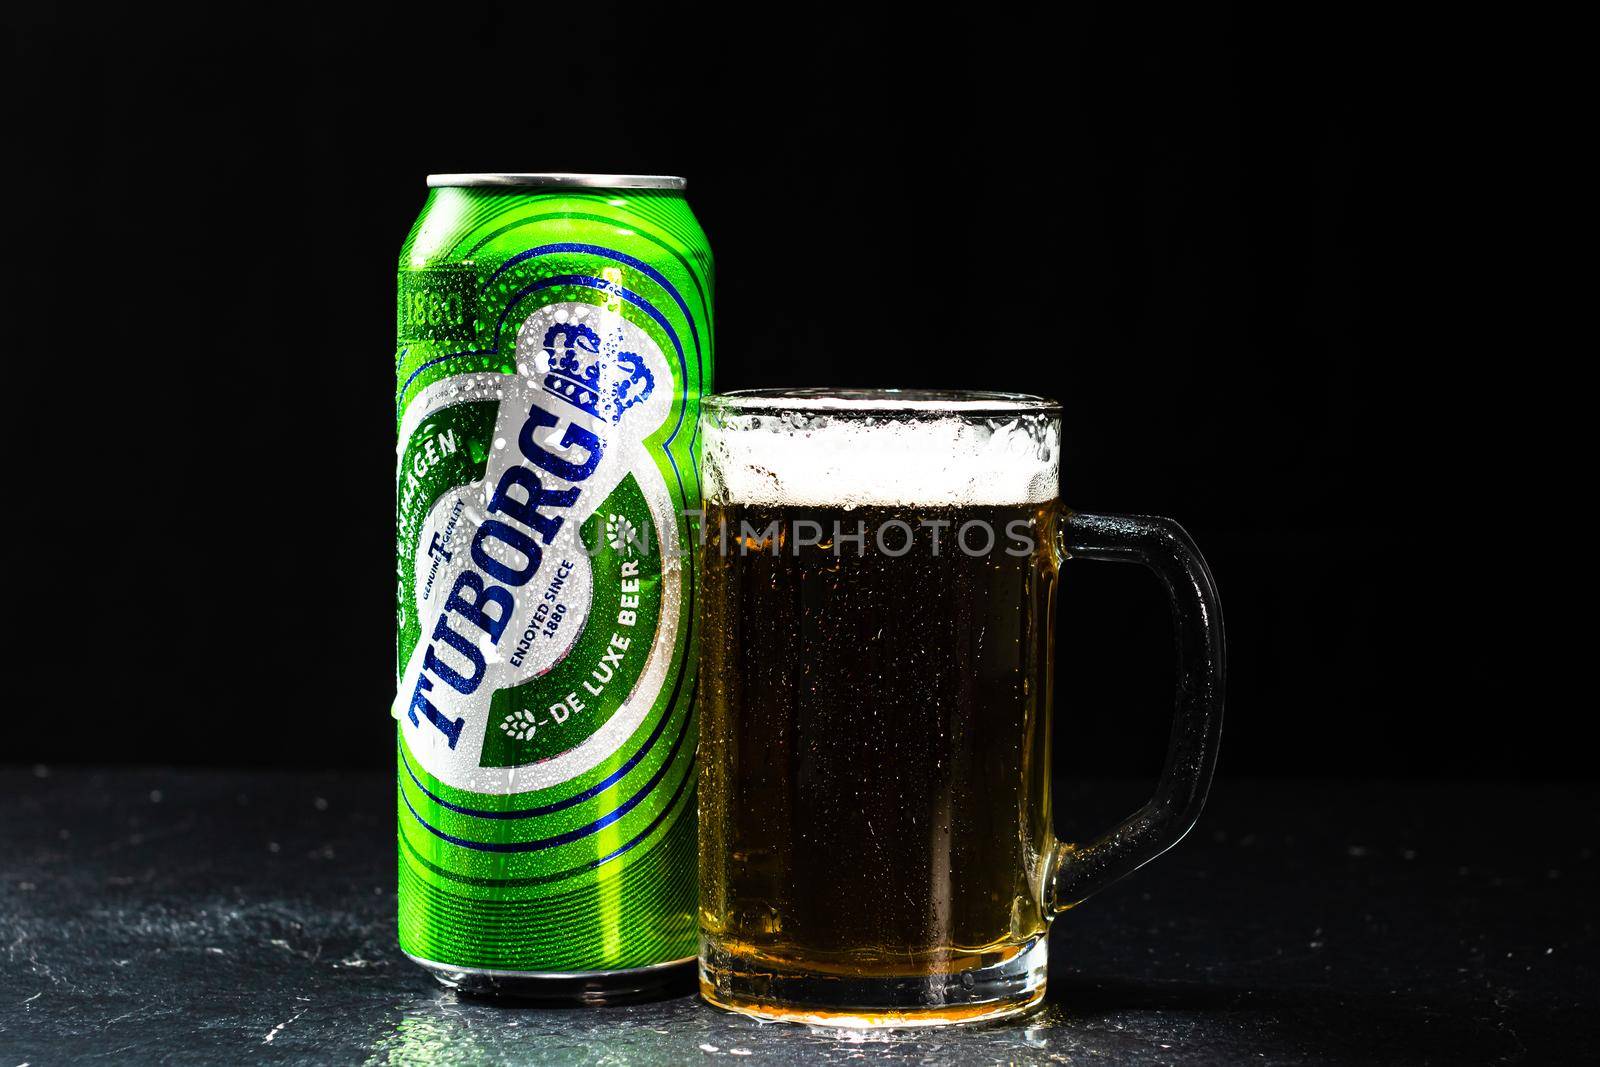 Can of Tuborg beer and beer glass on dark background. Illustrative editorial photo shot in Bucharest, Romania, 2021